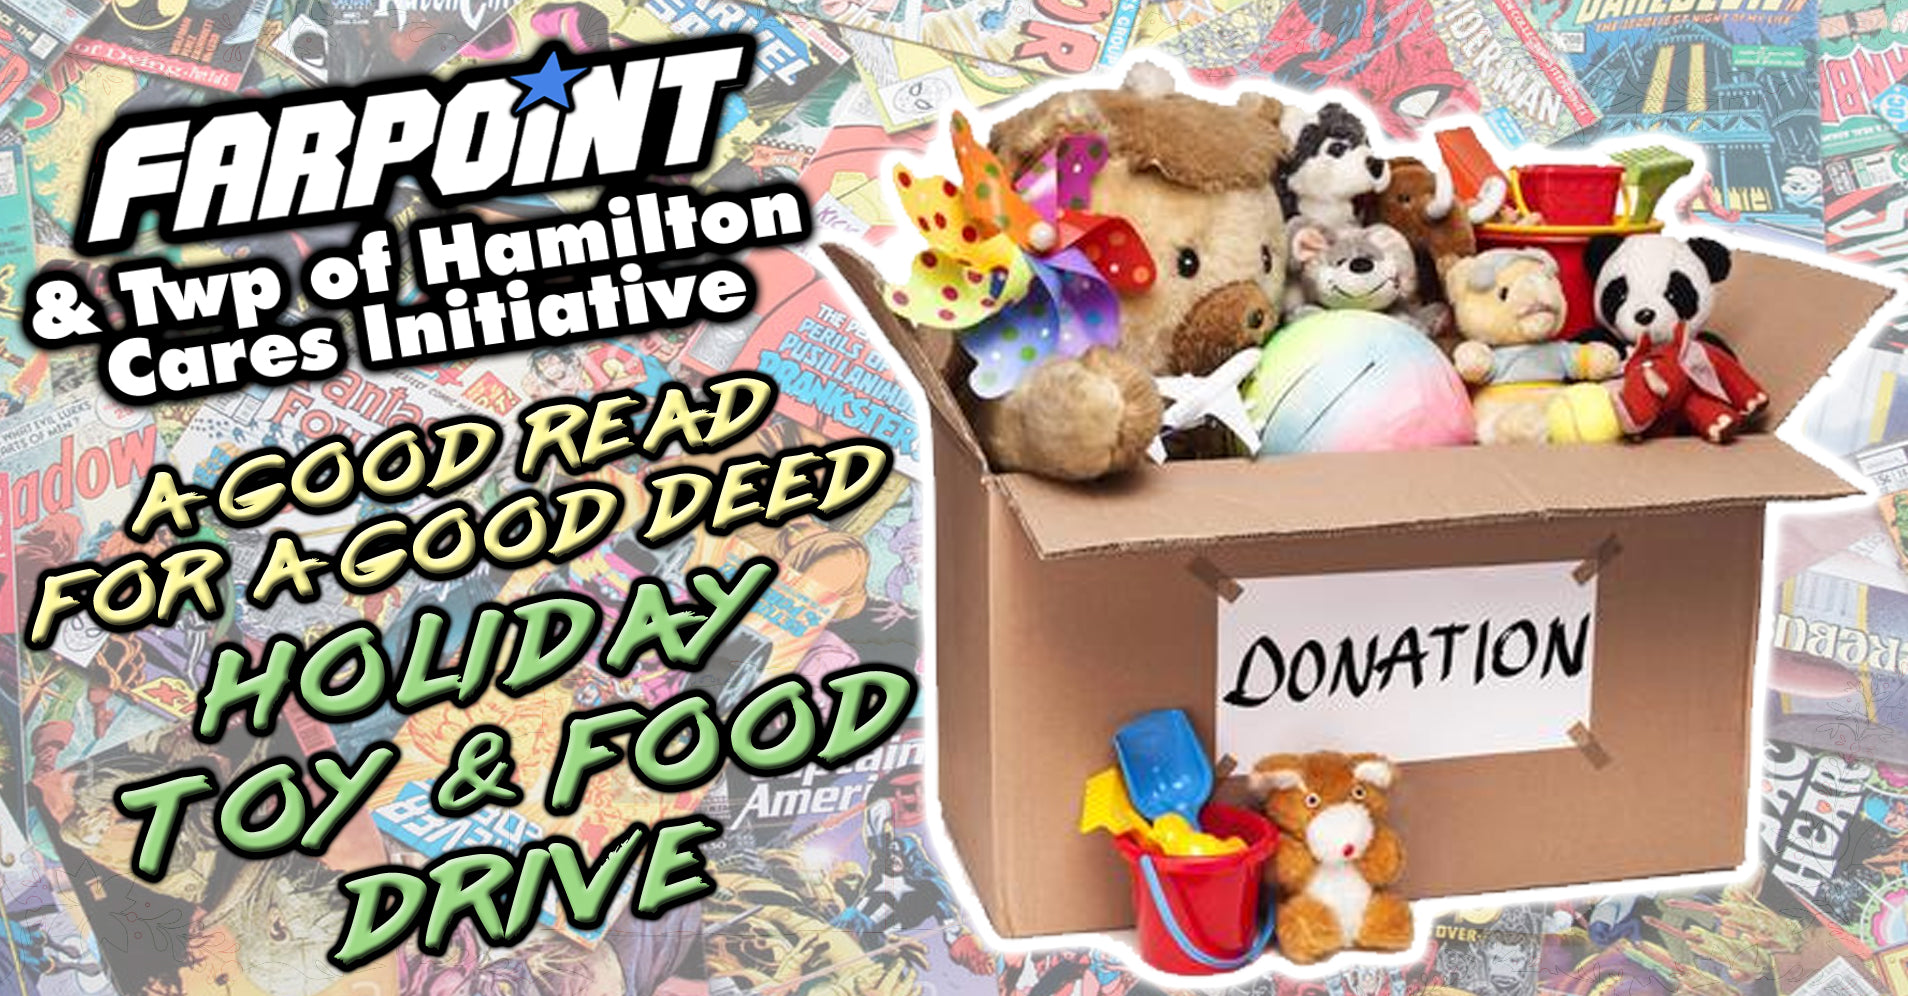 A Good Read For A Good Deed Holiday Toy & Food Drive